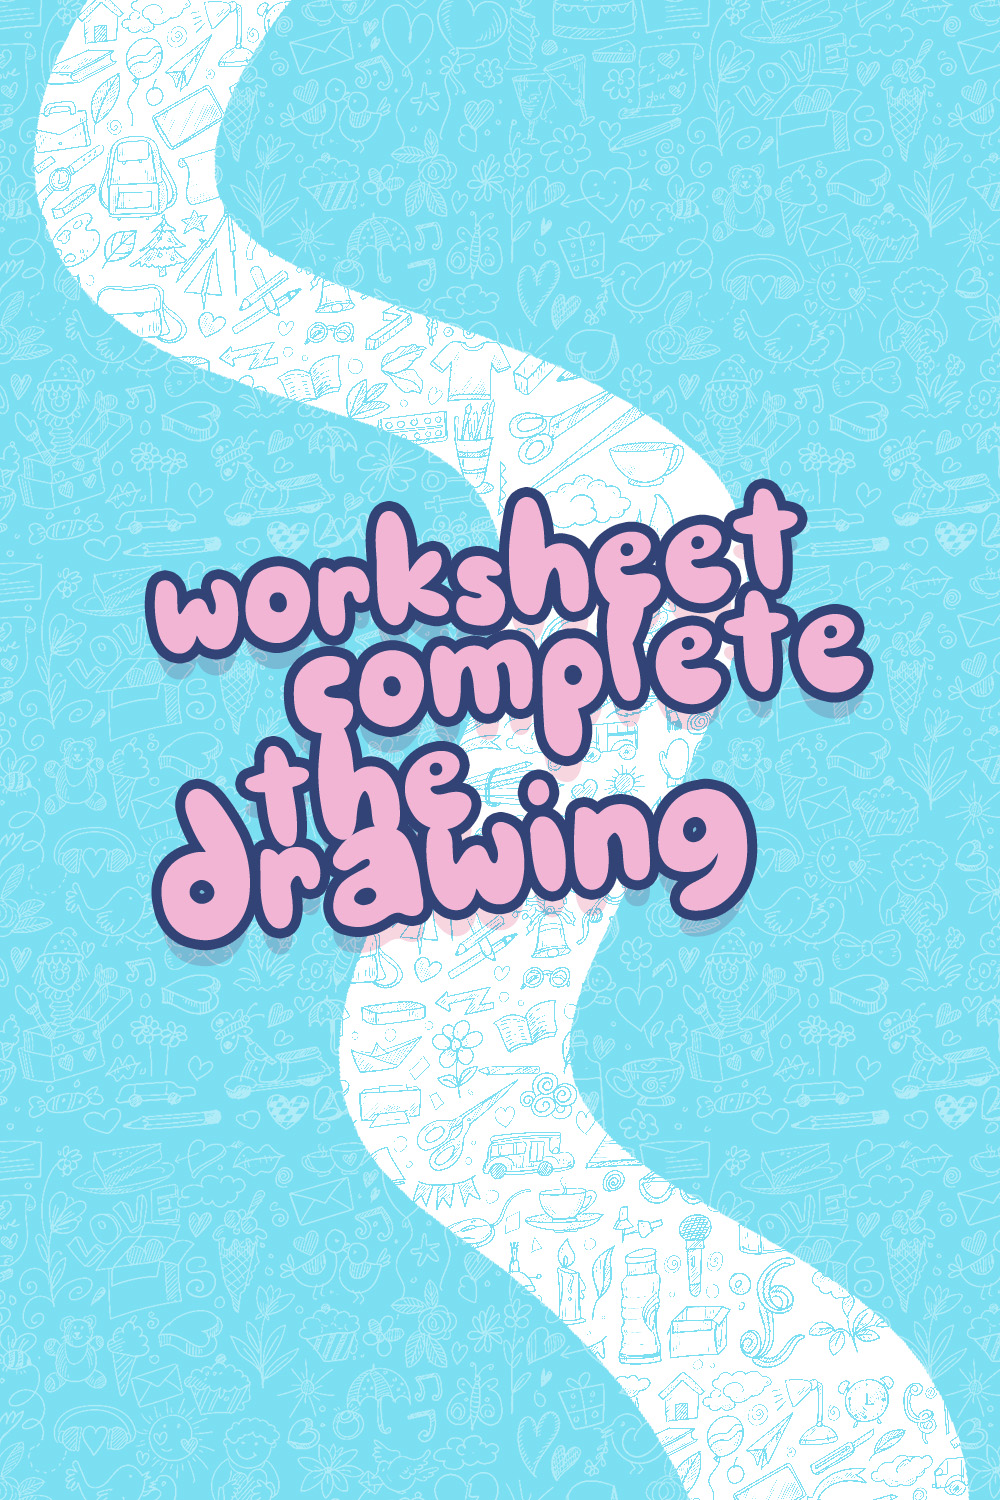 7 Worksheets Complete The Drawing Worksheeto